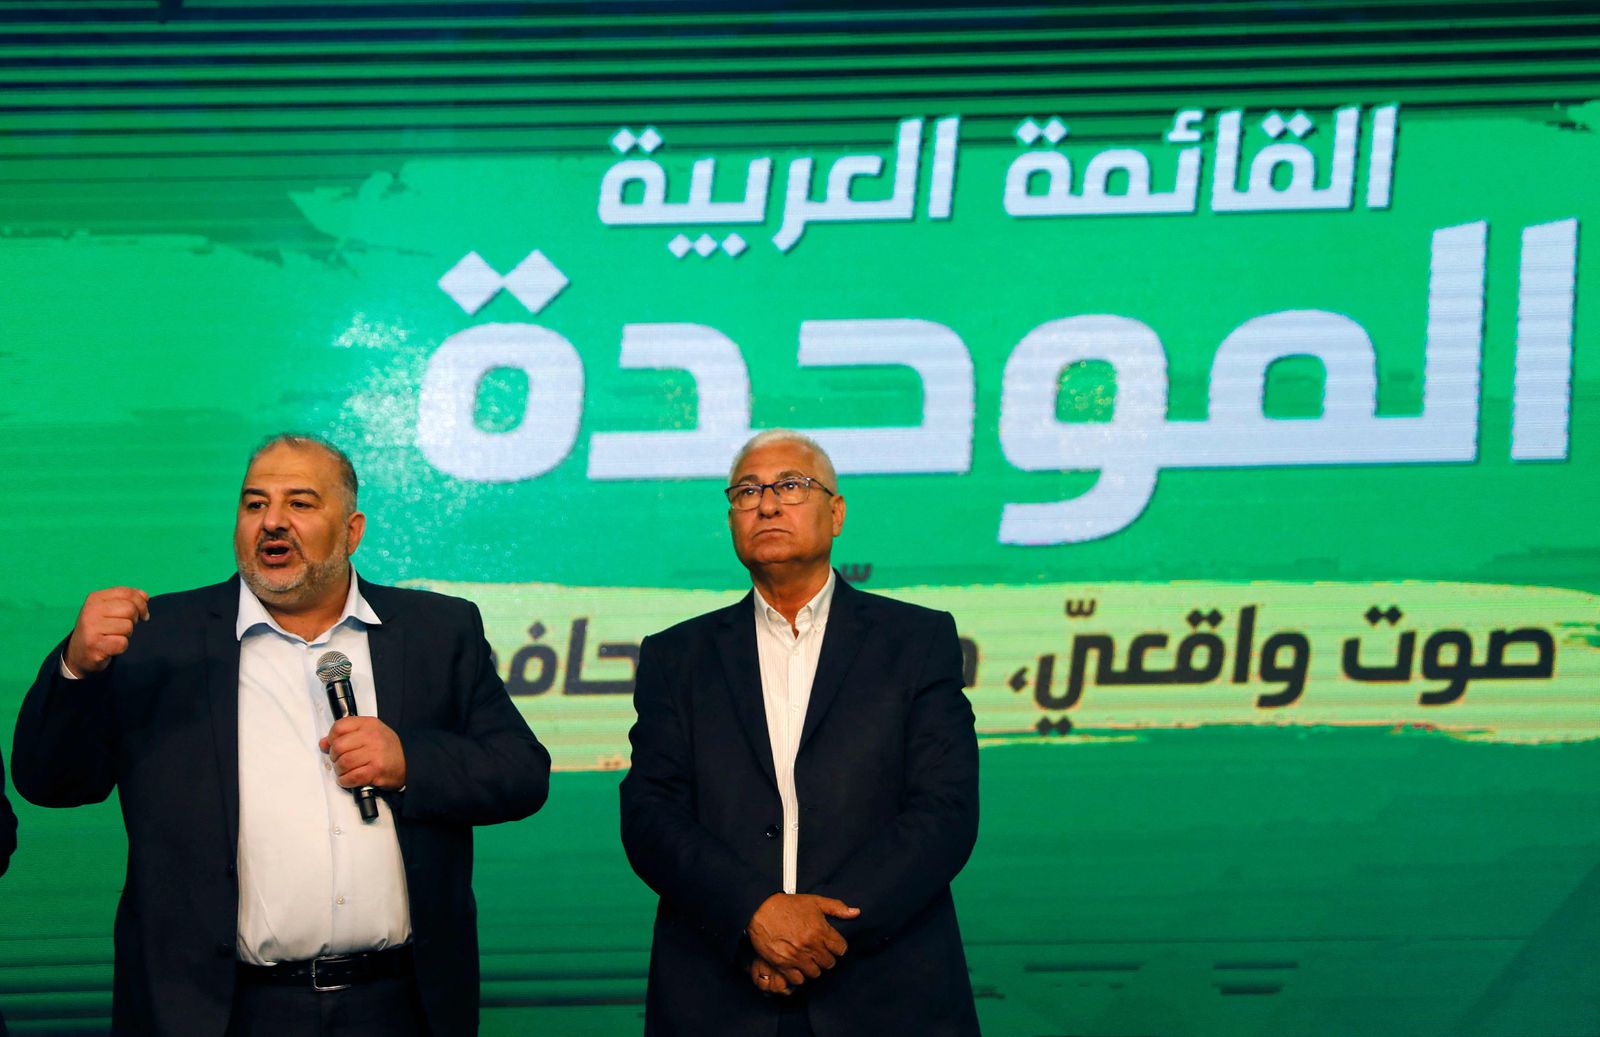 Mansour Abbas (L), leader of the United Arab List, speaks to supporters from his campaign headquarters in the northern Israeli city of Tamra on March 23, 2021, before polling stations close during the fourth Israeli national election in two years. (Photo by Ahmad GHARABLI / AFP) - AFP